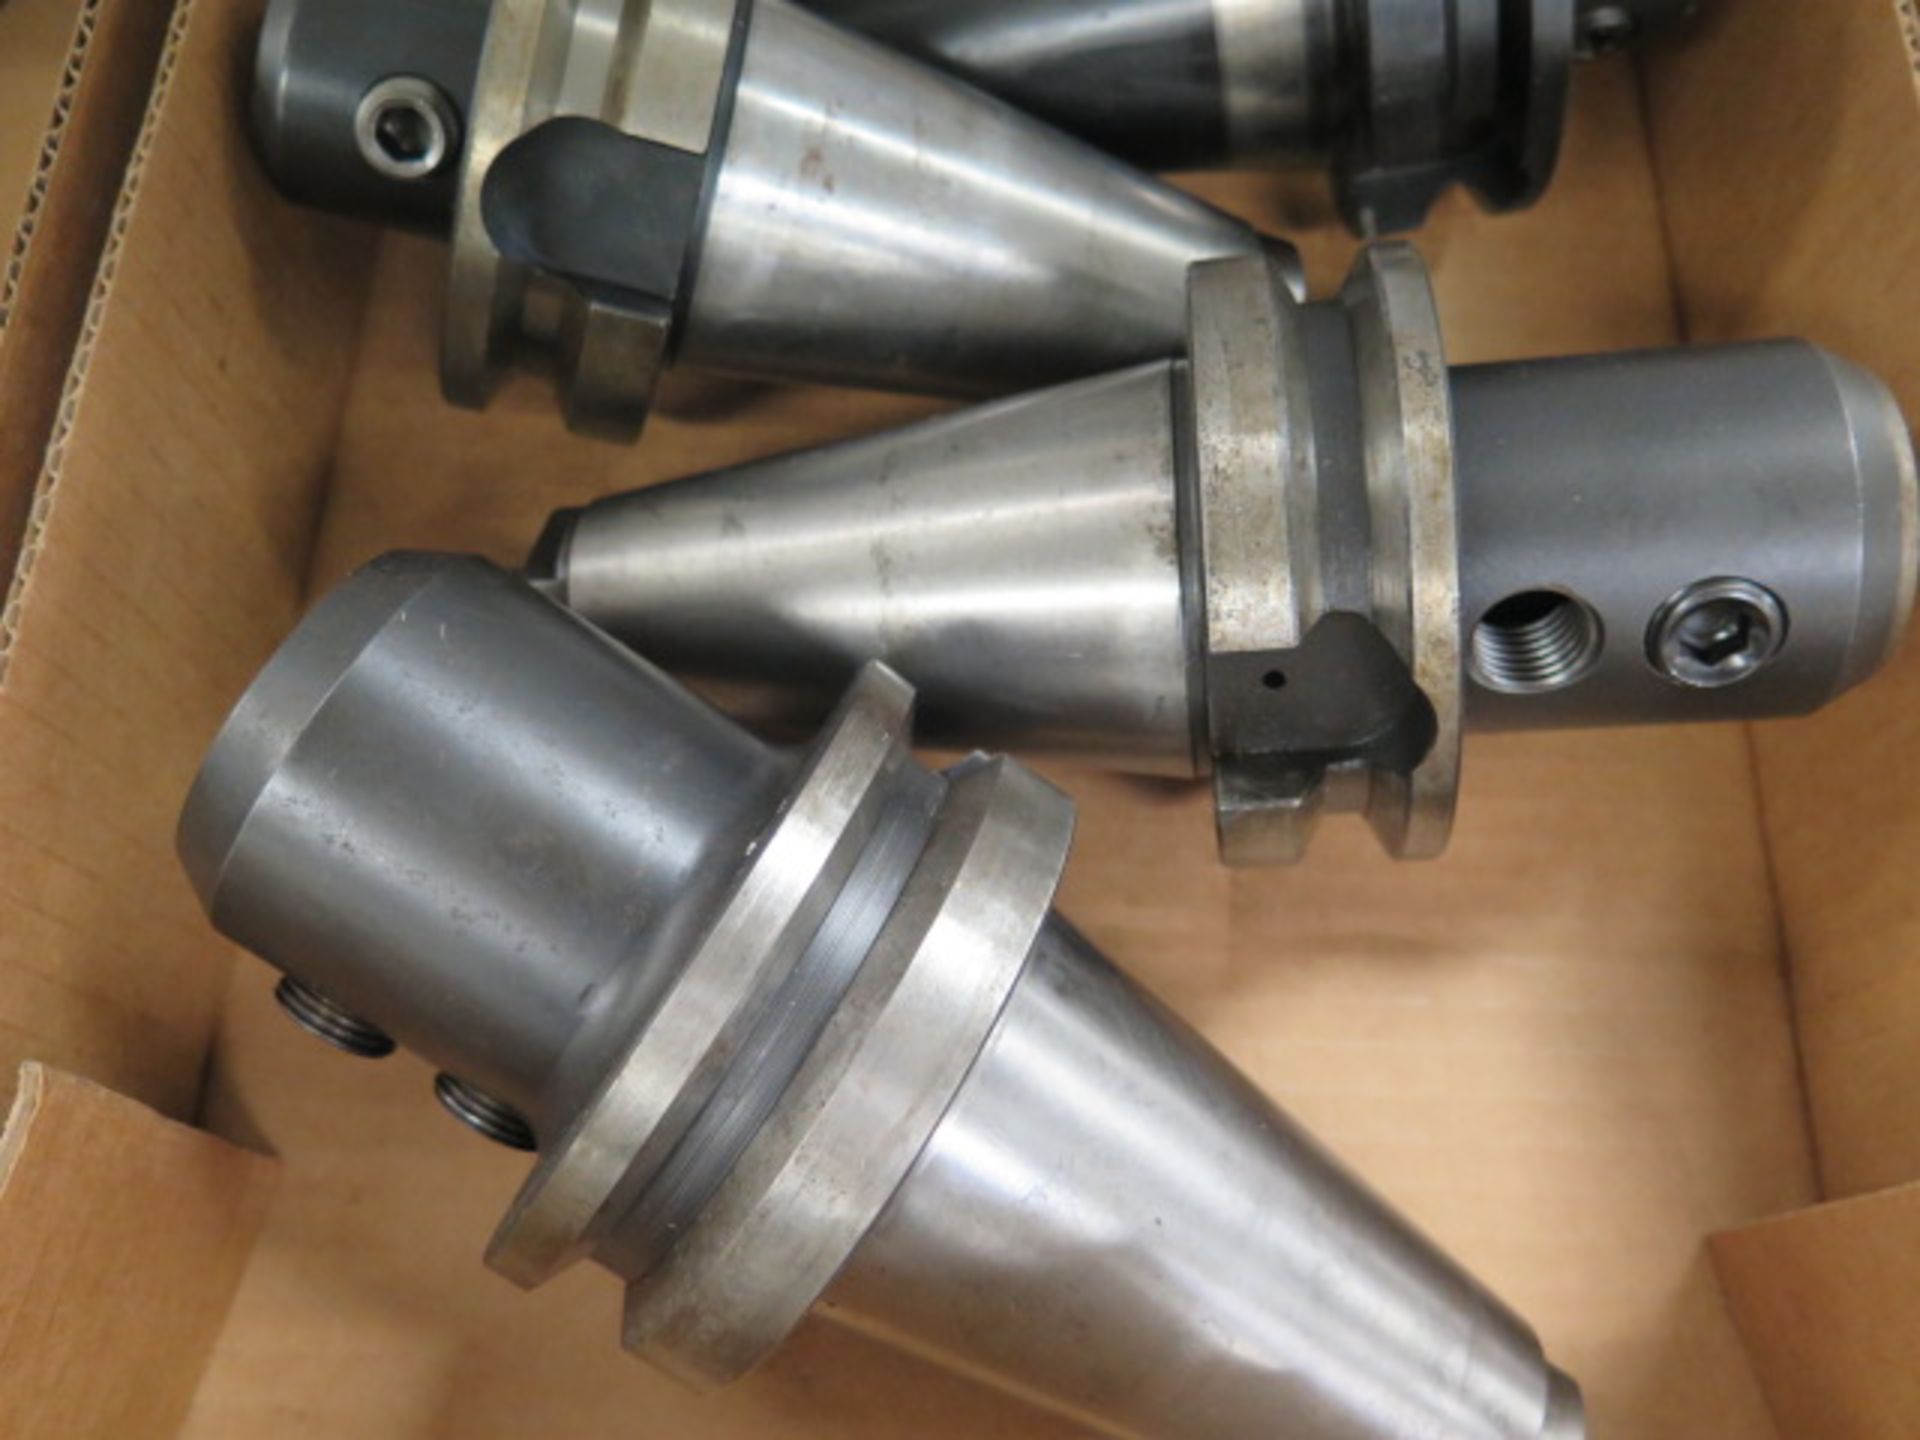 BT-50 Taper Tooling (5) (SOLD AS-IS - NO WARRANTY) (Located @ 2229 Ringwood Ave. San Jose) - Image 4 of 5